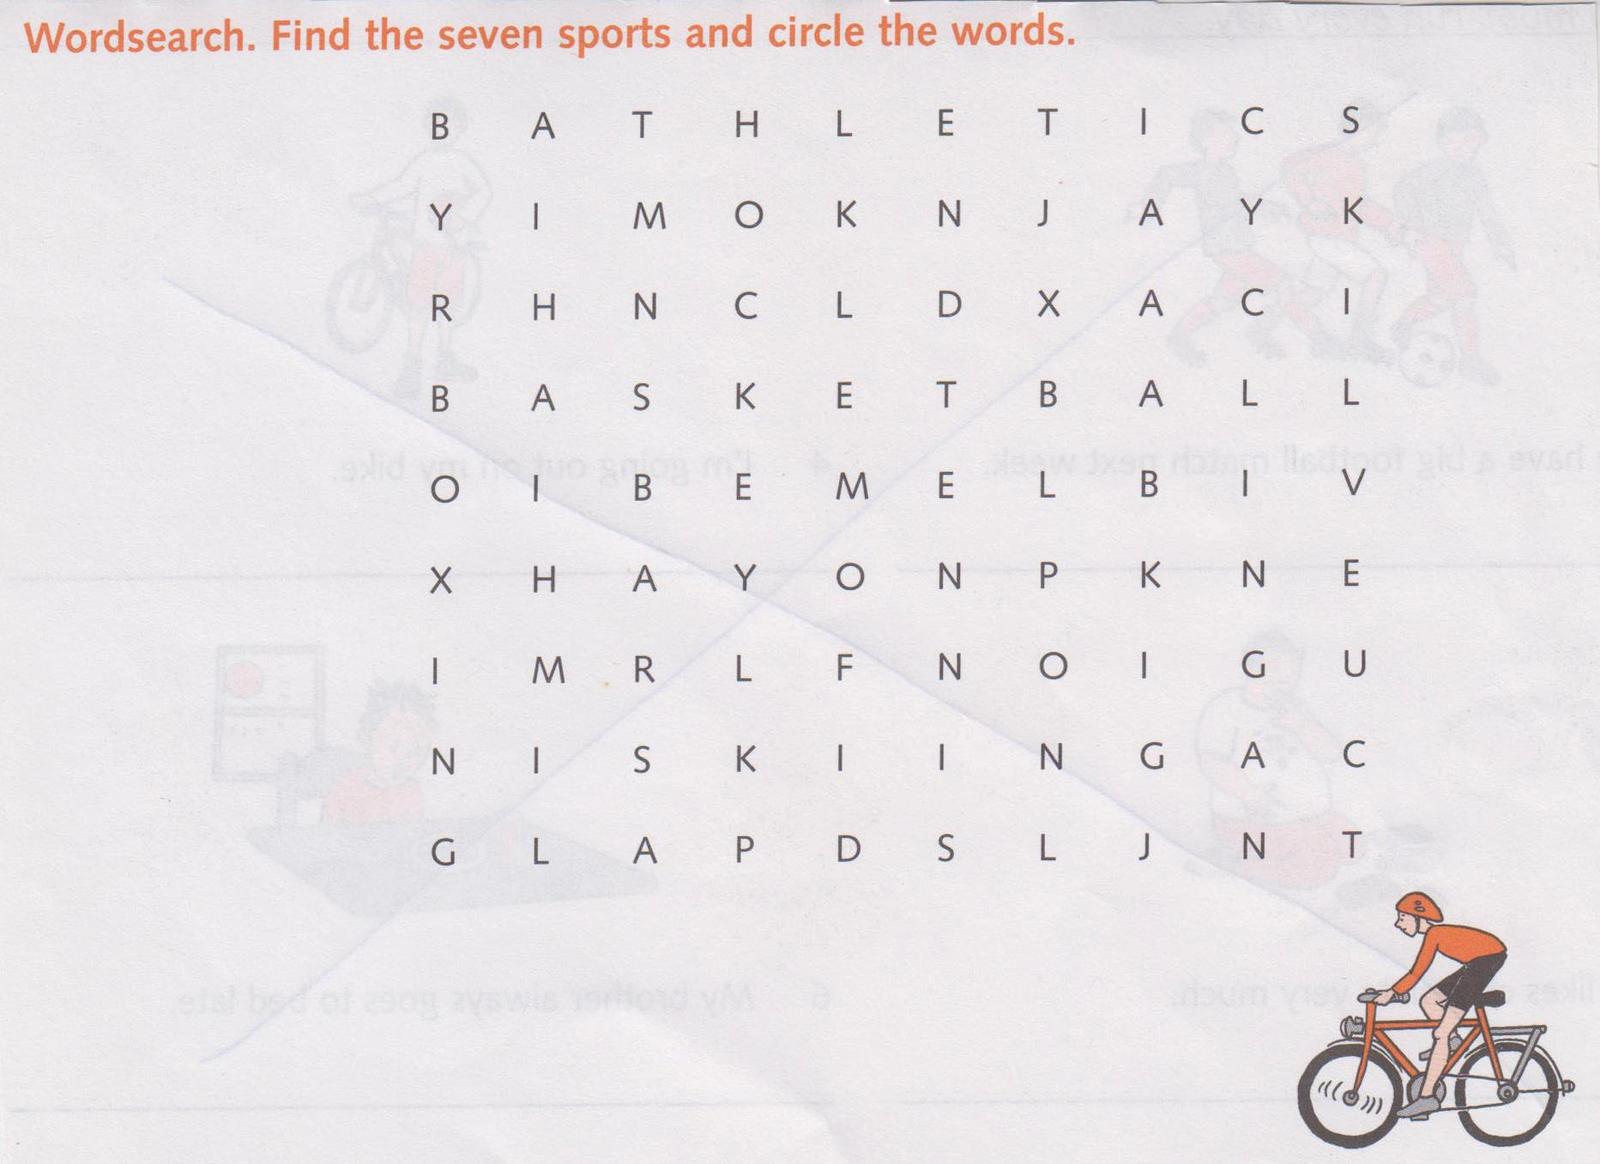 Wordsearch is one of my pupils’ favorite game!